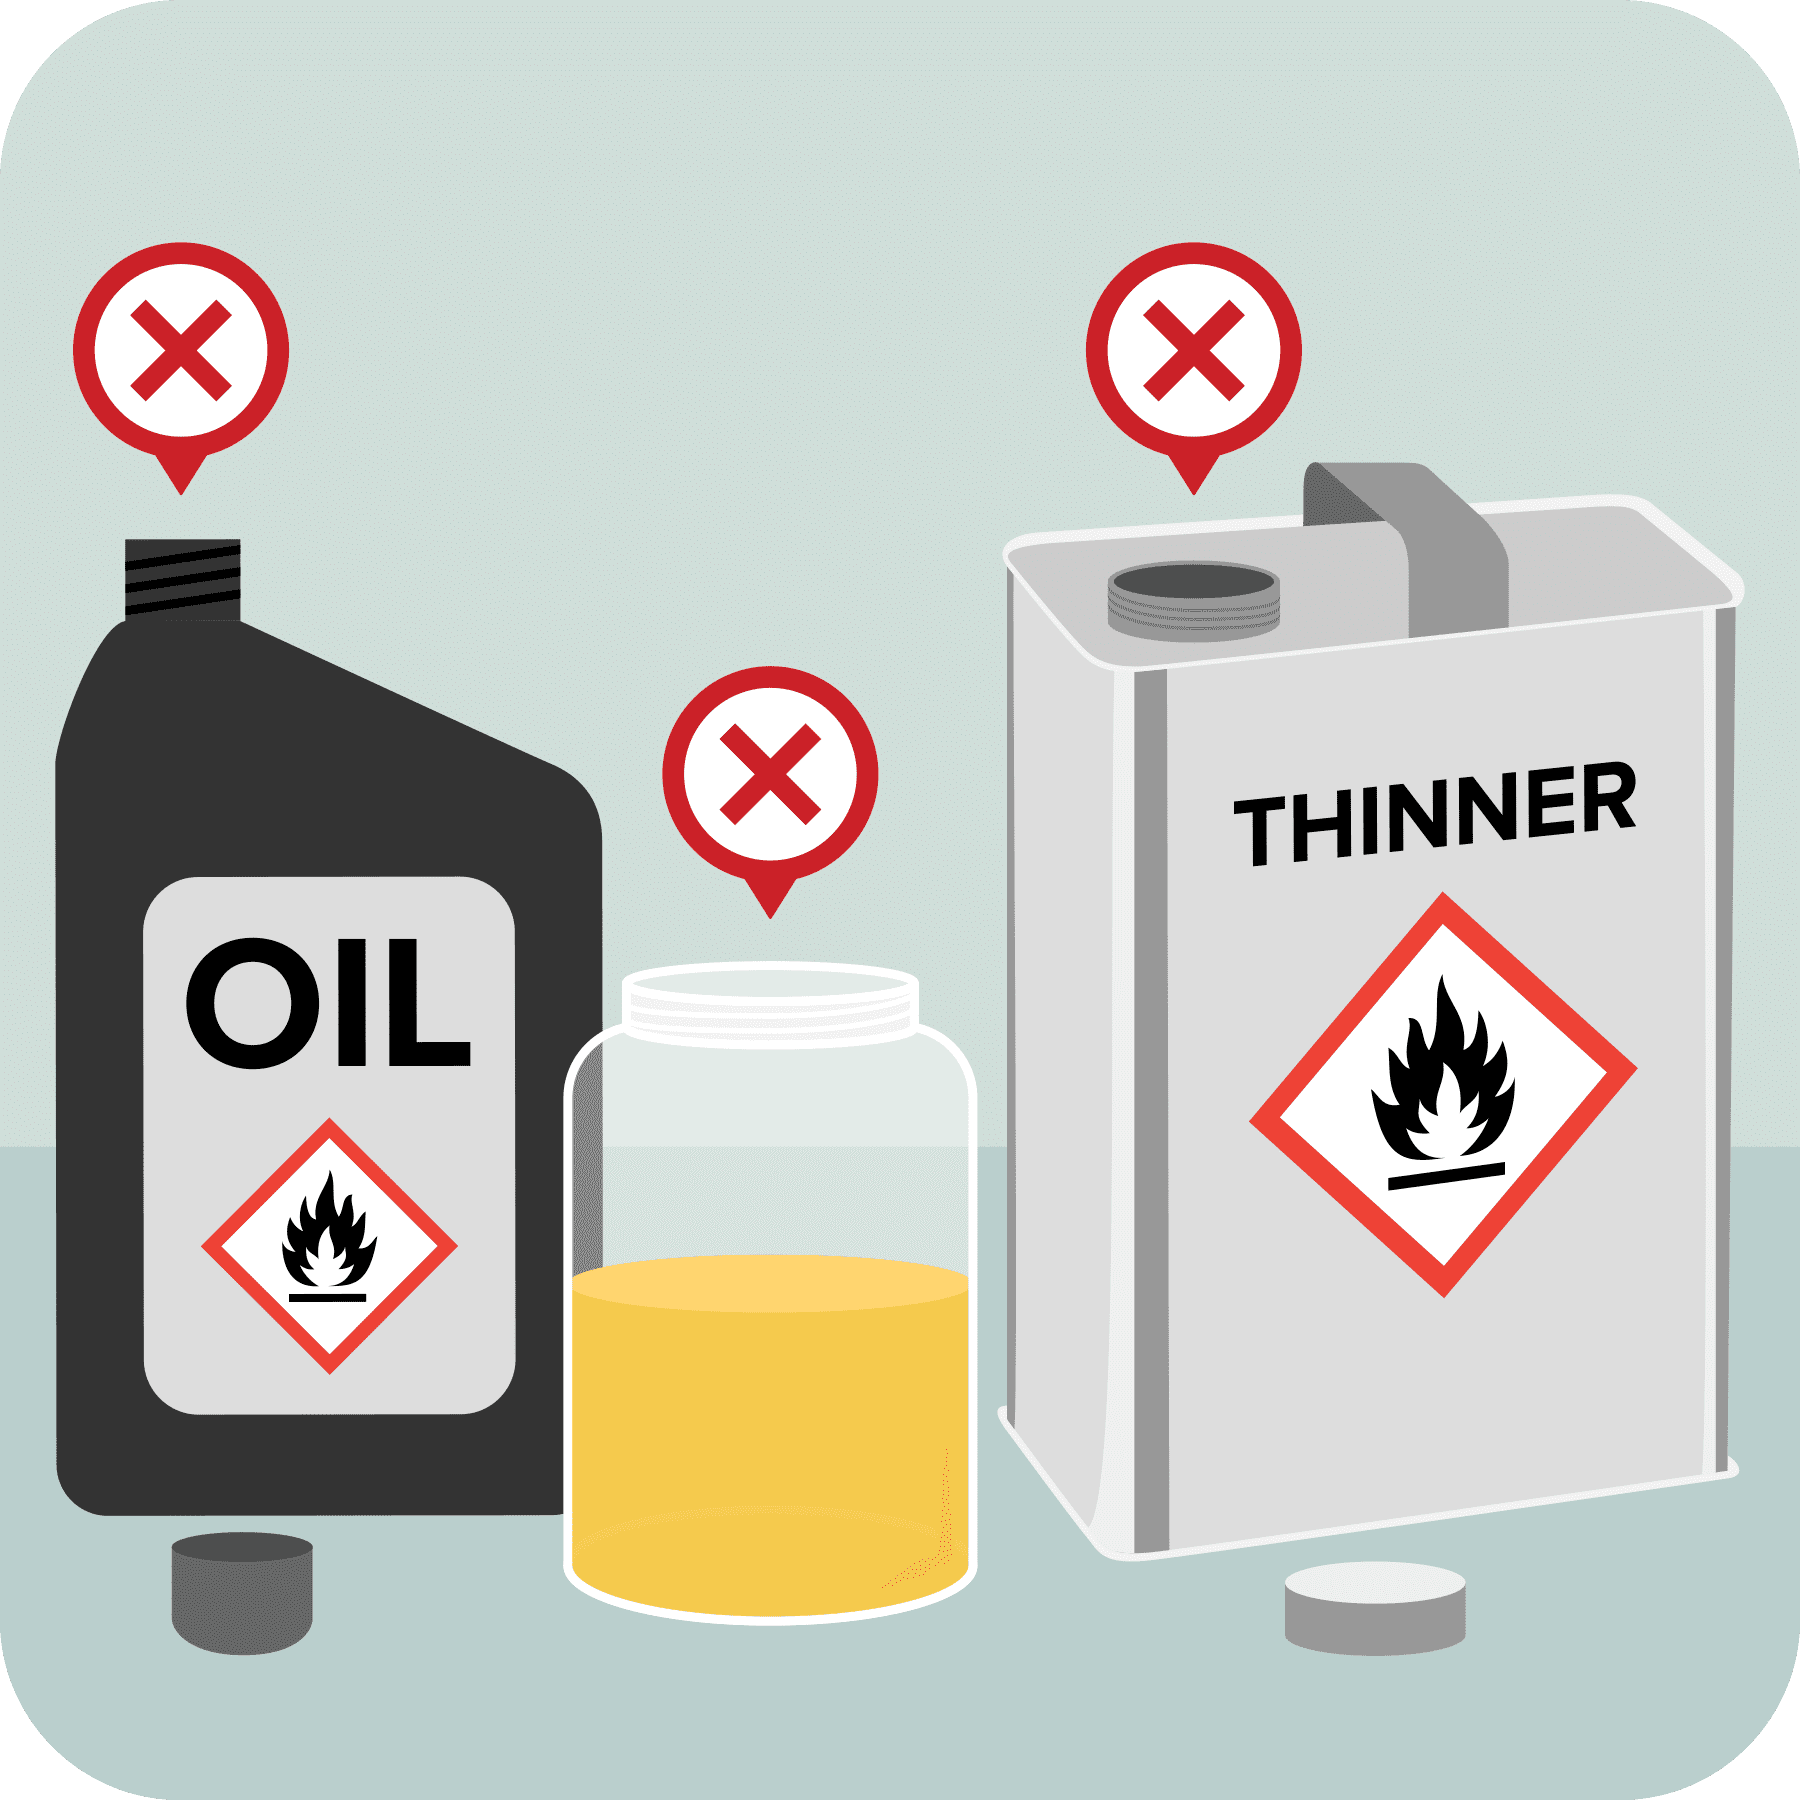 Oil and paint thinner containers shown with a glass jar. A red x is above each.